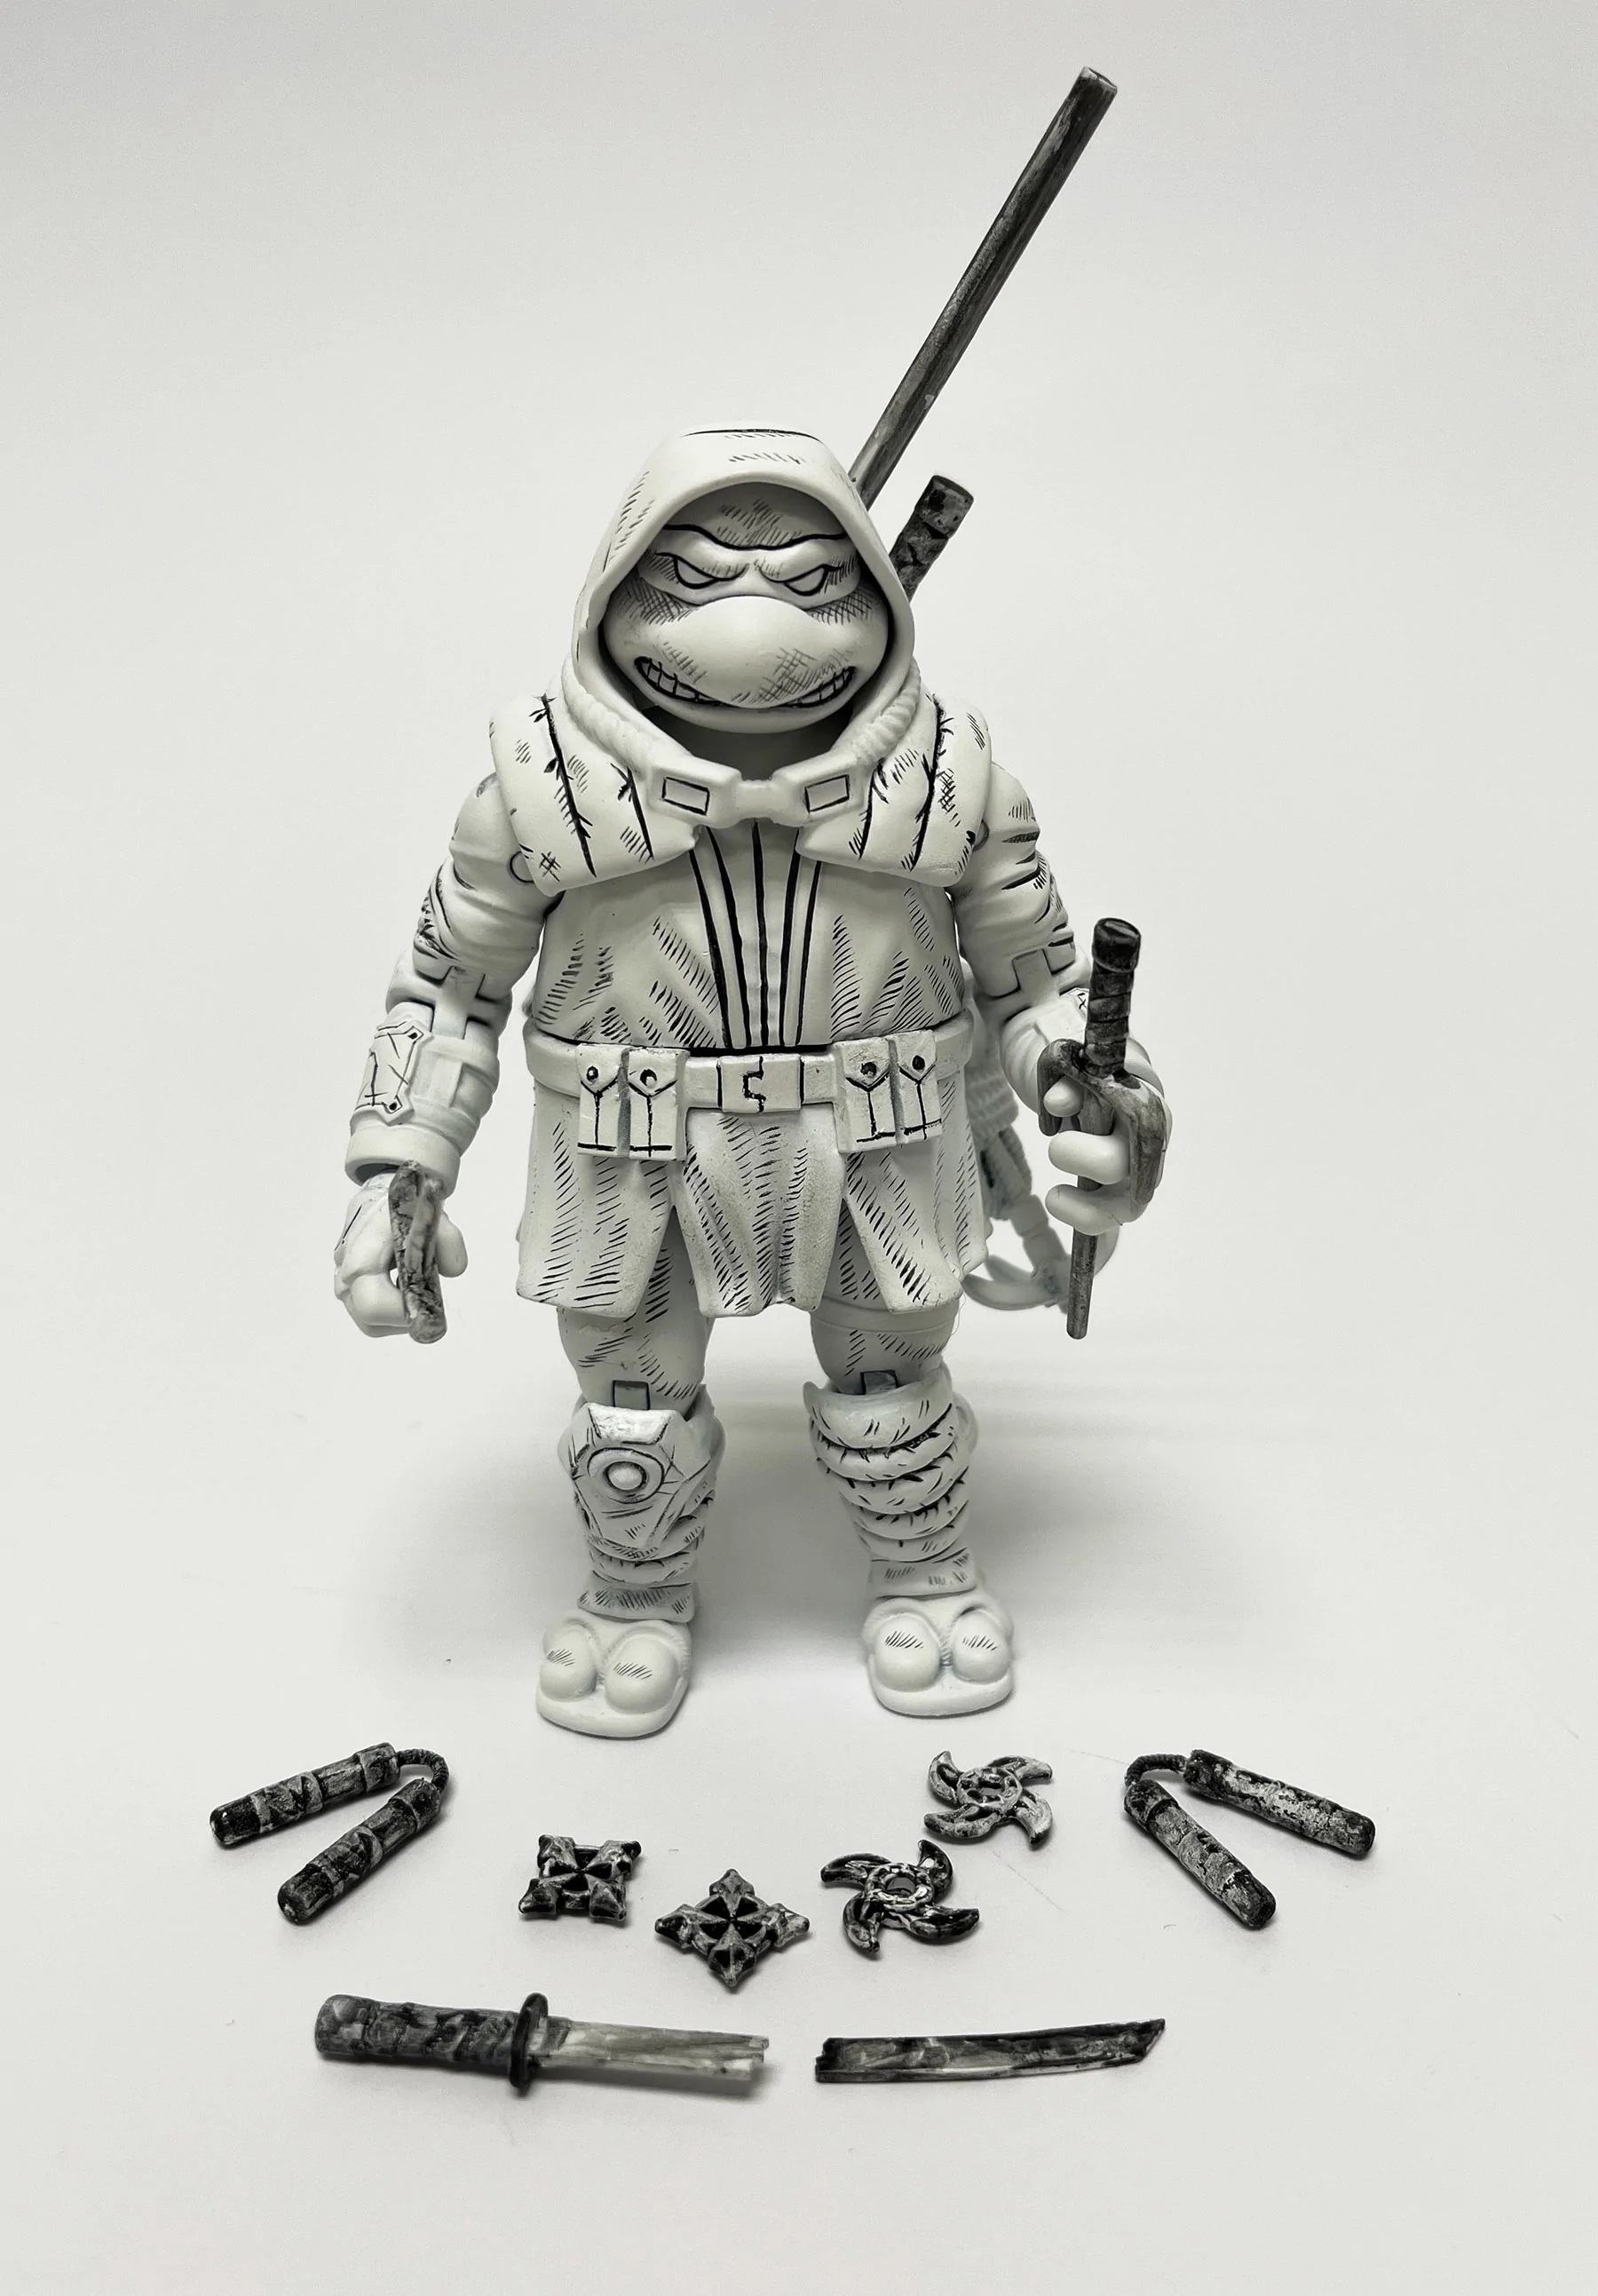 Teenage Mutant Ninja Turtles The Last Ronin Action Figure Previews Exclusive Black & White Chase